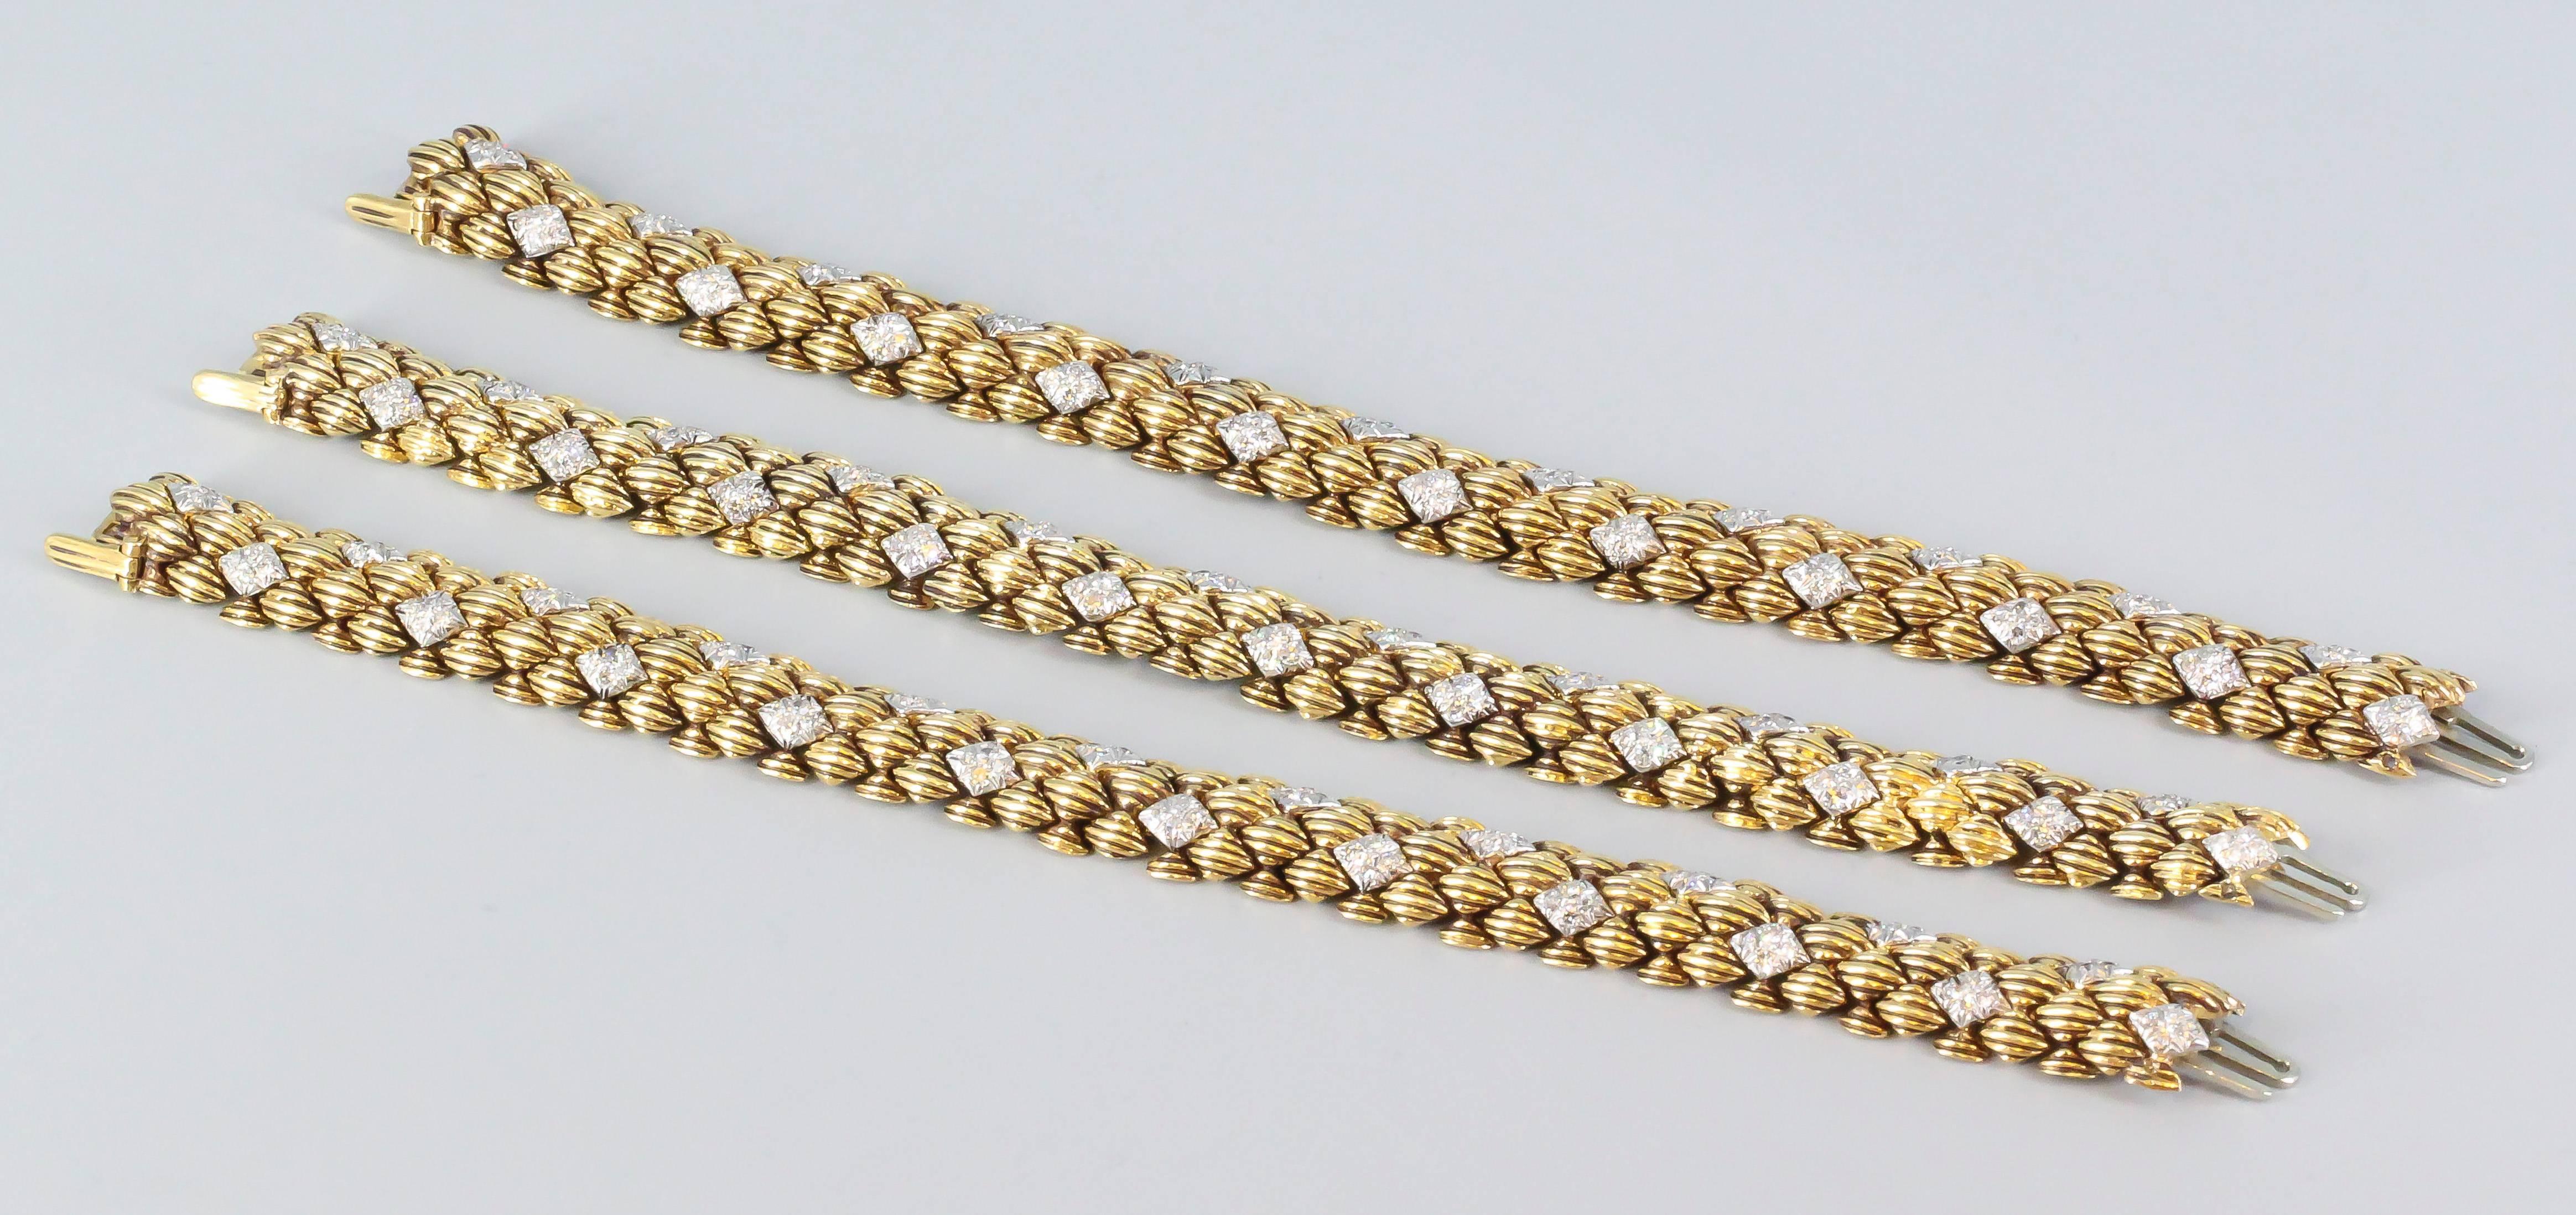 Very fine and bold trio of diamond and 18K yellow gold link bracelets by David Webb. They feature high grade round brilliant cut diamonds, with ribbed links throughout. Beautifully made and a very chic look. 

Hallmarks: Webb, 18k.